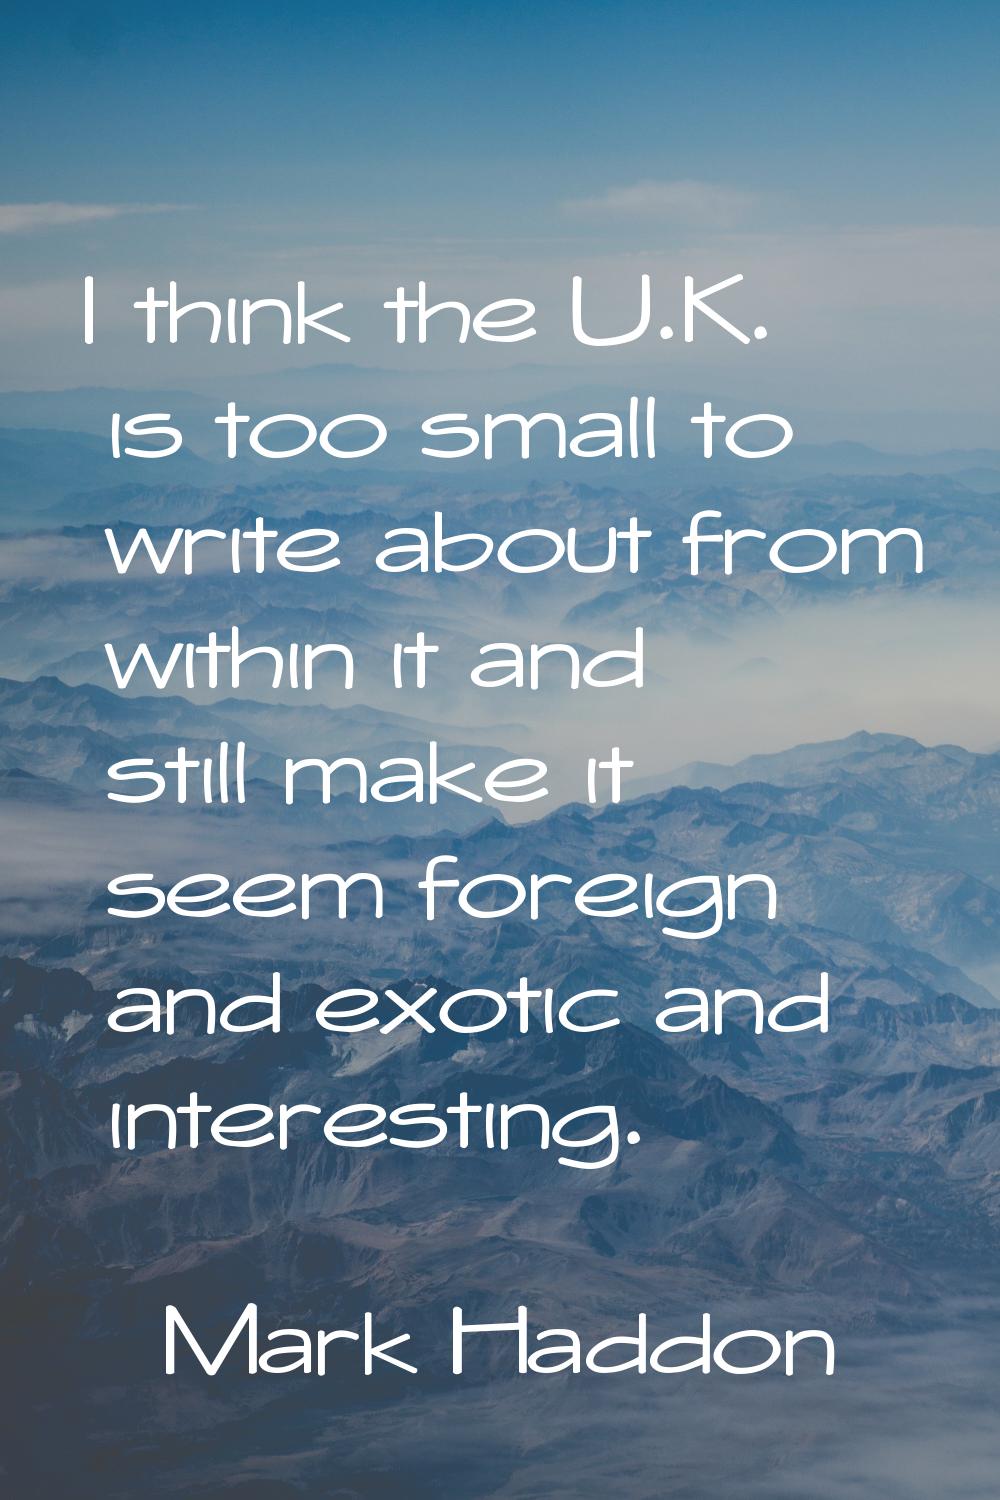 I think the U.K. is too small to write about from within it and still make it seem foreign and exot